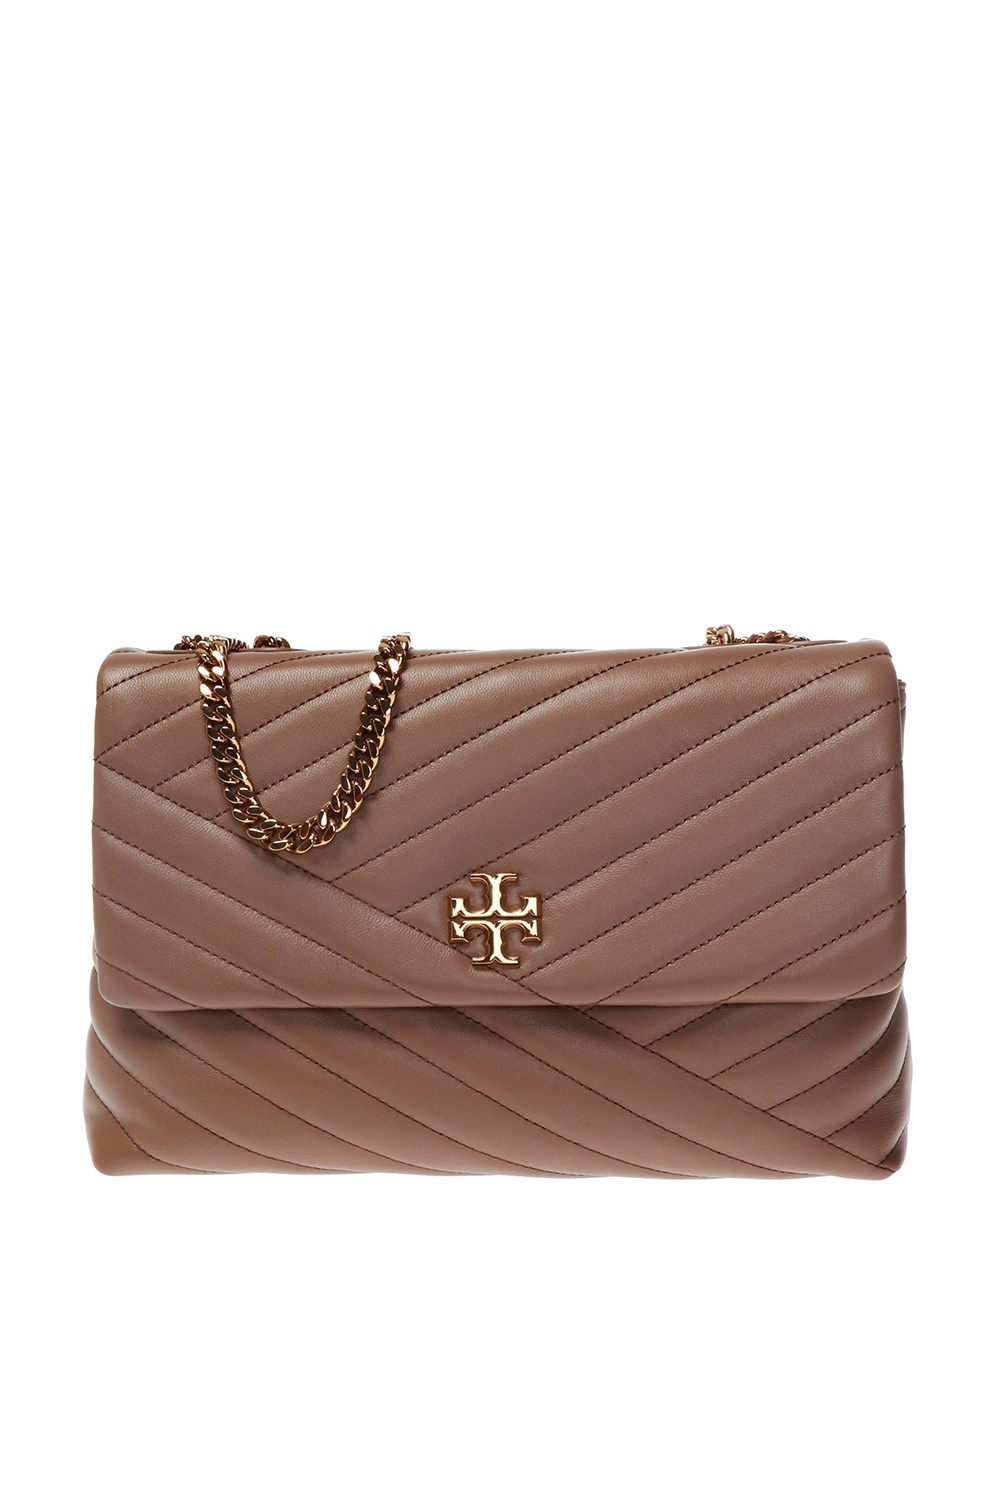 Tory Burch Kira Chevron Quilted Devon Sand Leather Chain Wallet in Natural